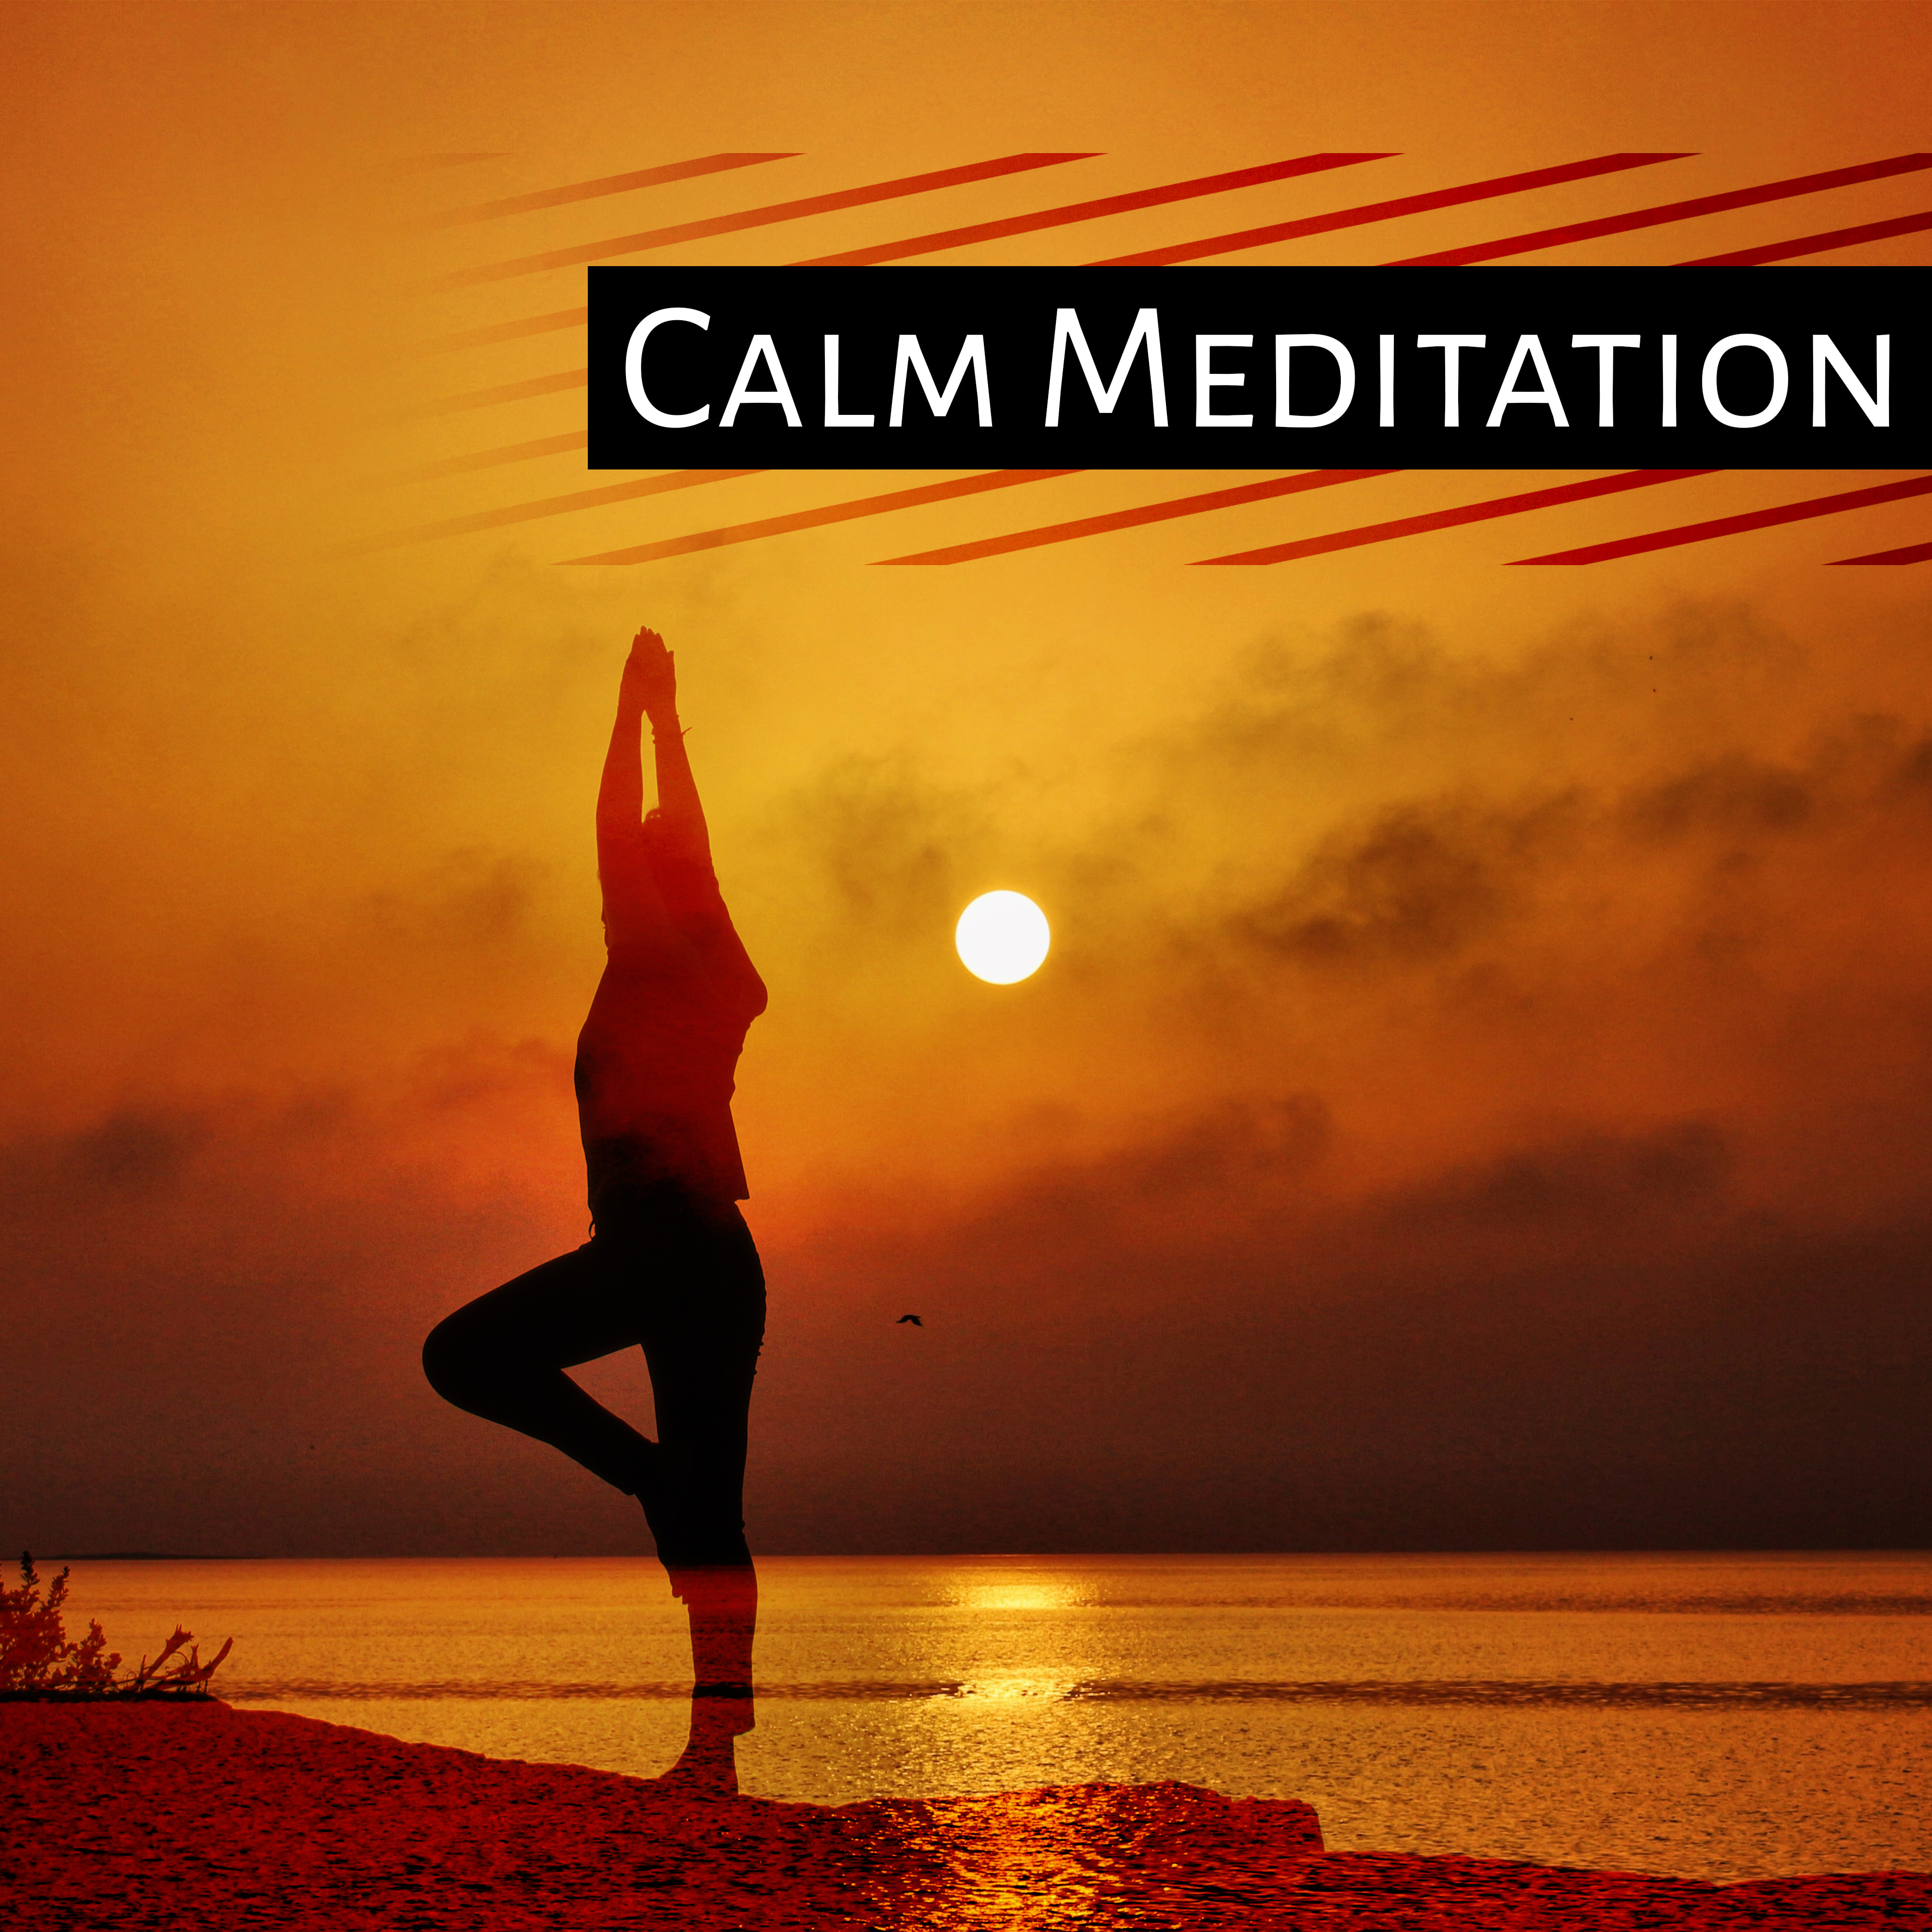 Calm Meditation – Training Yoga, Peaceful Music, Relaxation, Nature Sounds for Concentration, Stress Relief, Meditate